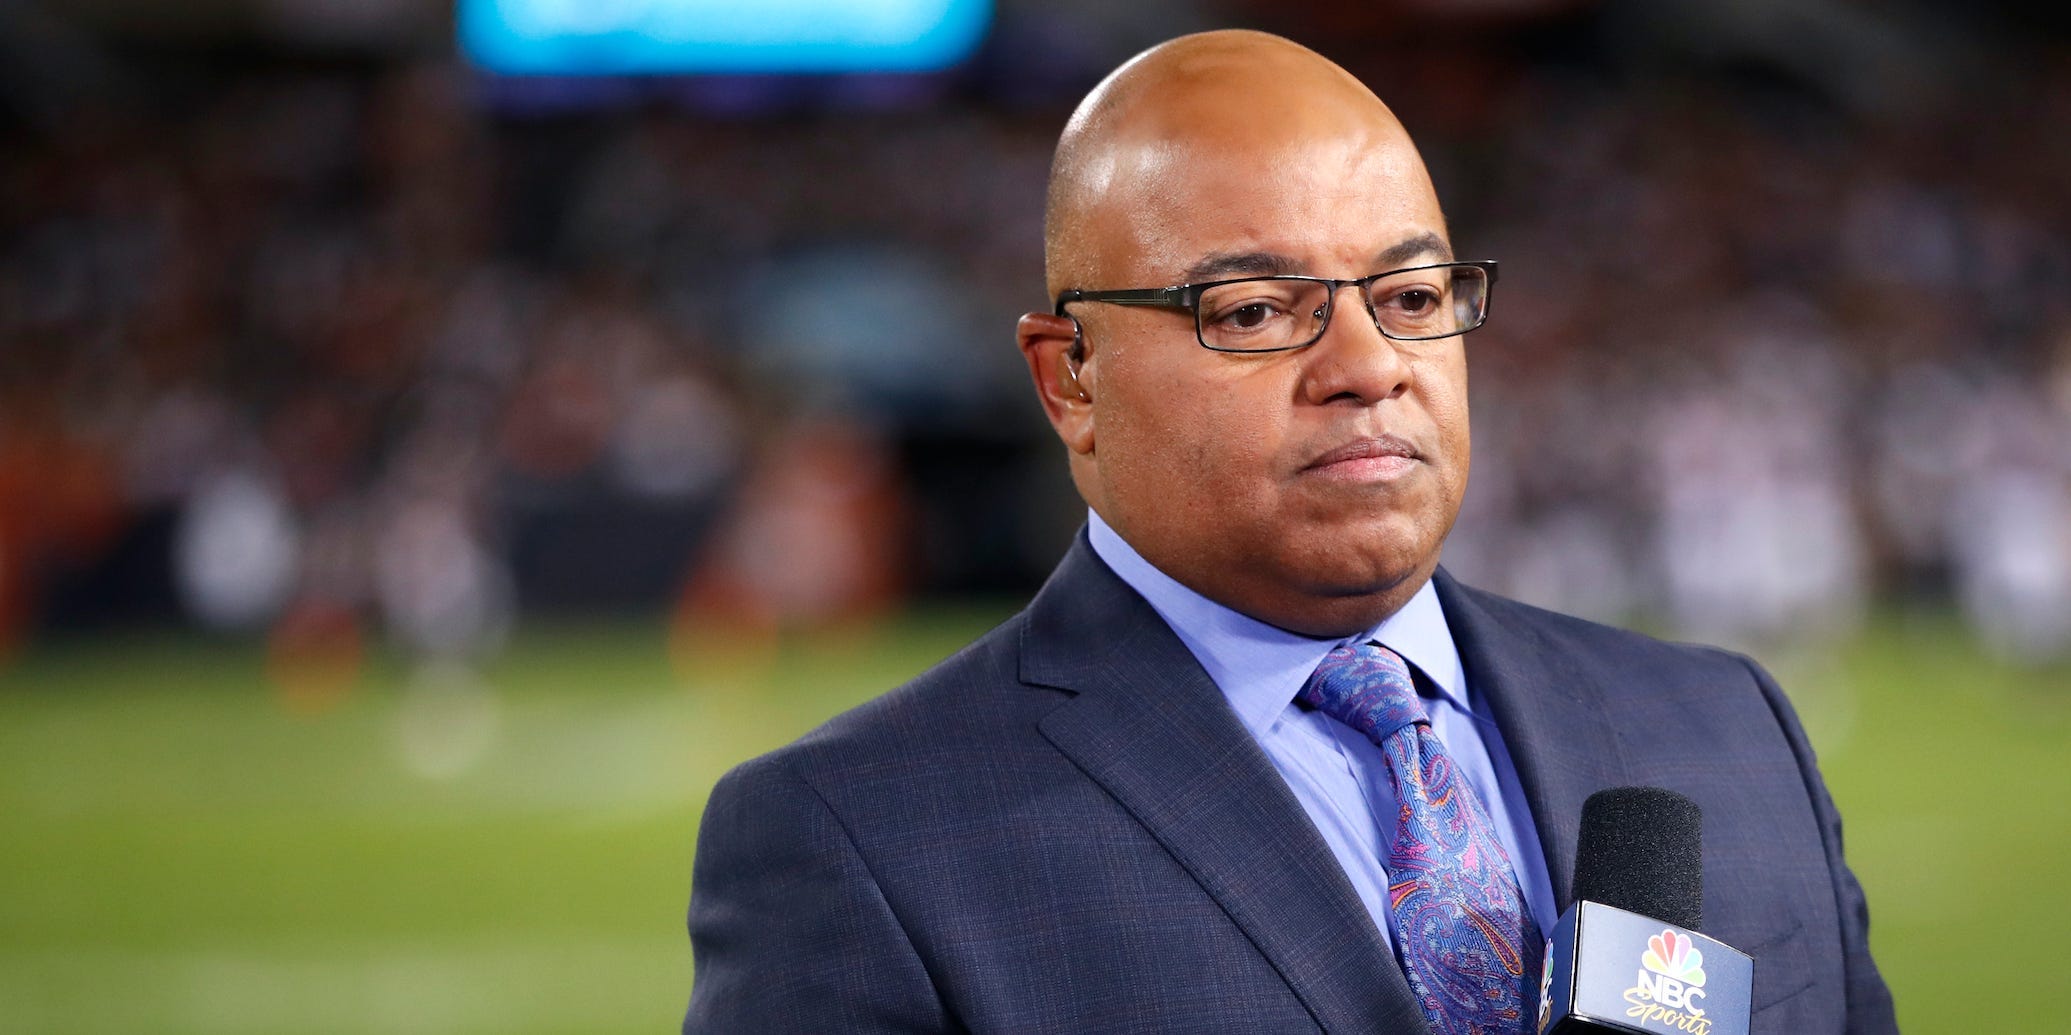 NBC sportscaster Mike Tirico works the sidelines during an NFL football game between the Green Bay Packers and the Chicago Bears, Thursday, Sept. 5, 2019, in Chicago.